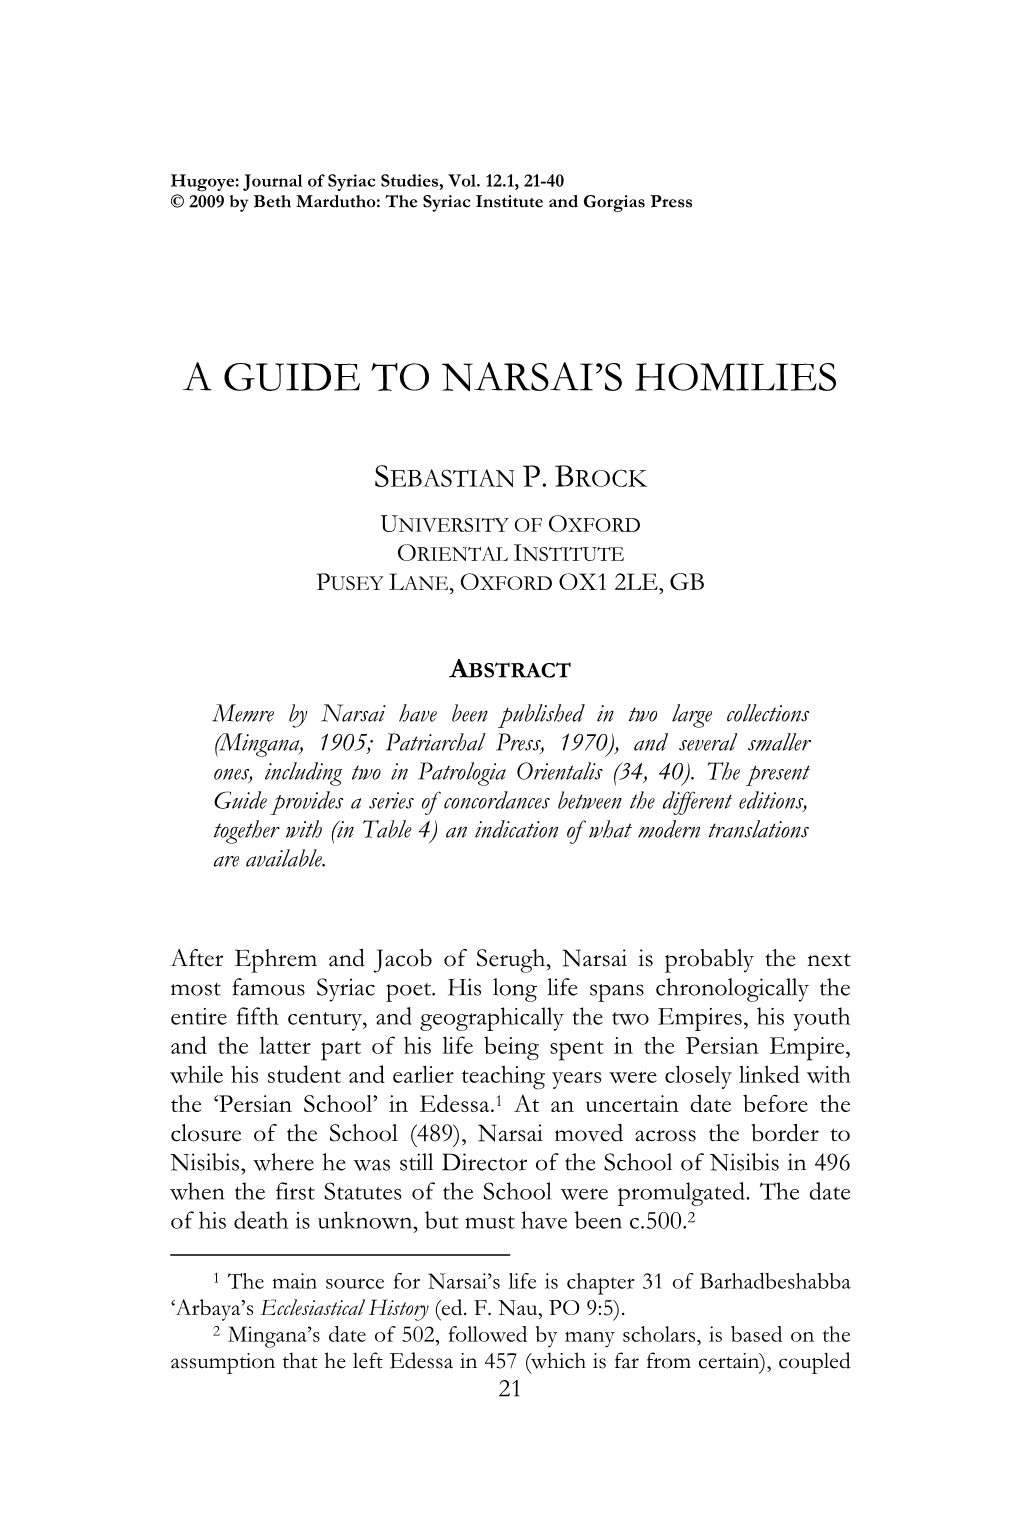 A Guide to Narsai's Homilies